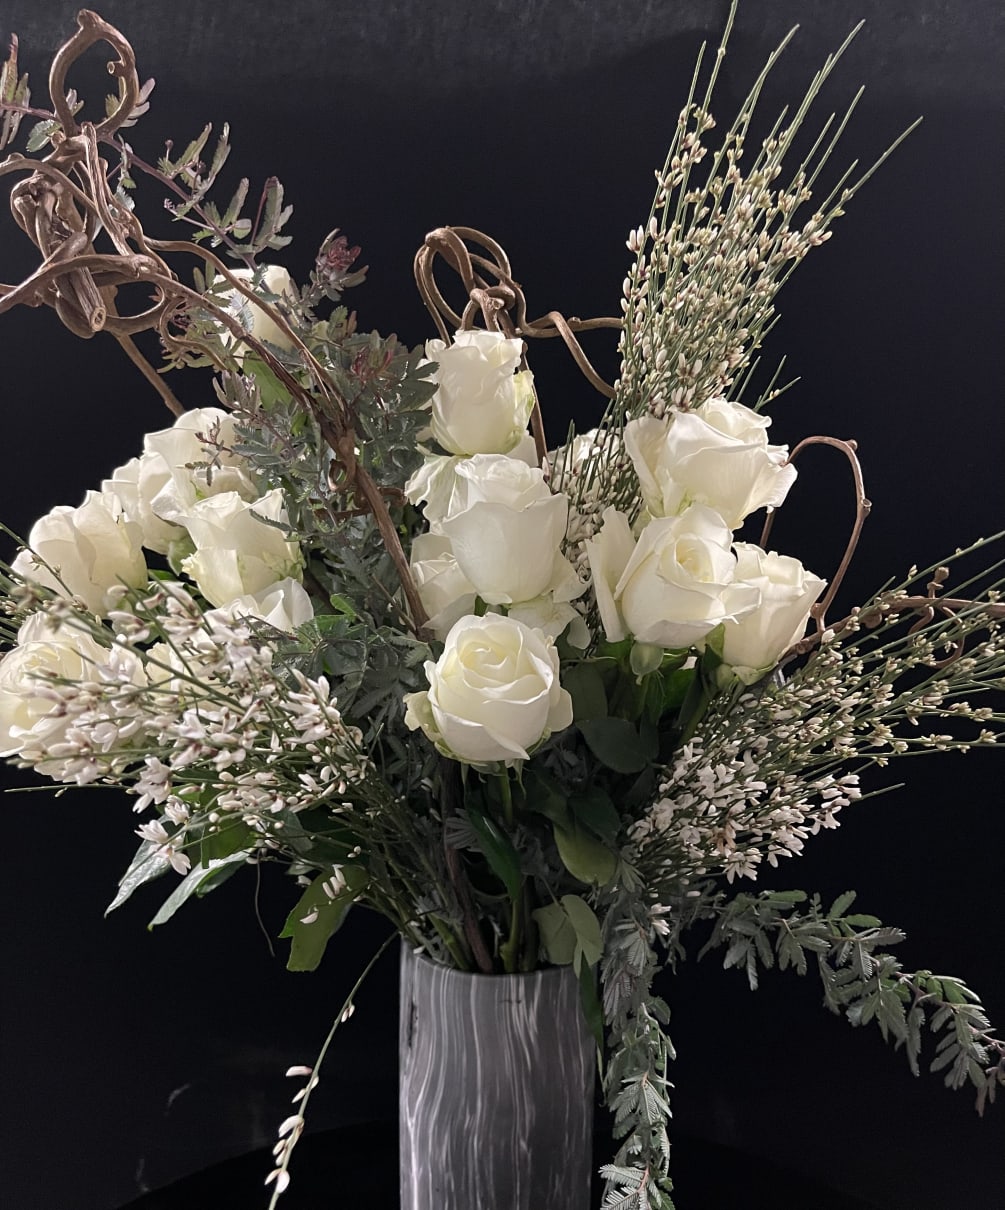 Tall two dozen in stunning vase and surrounded by beautiful greens and